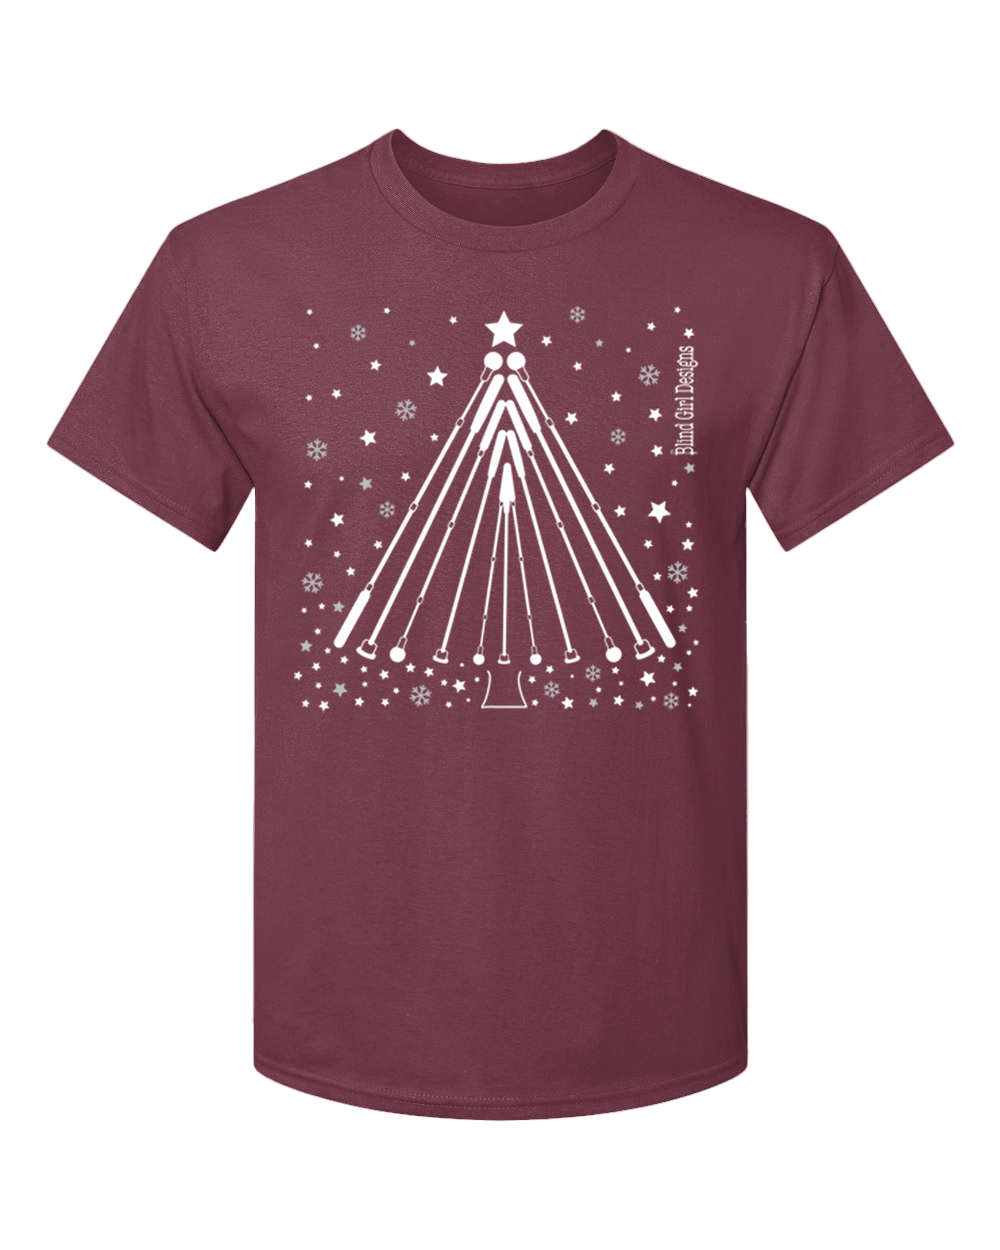 New 3D!  Tactile Winter Tree White Cane T-Shirt - Deep Berry